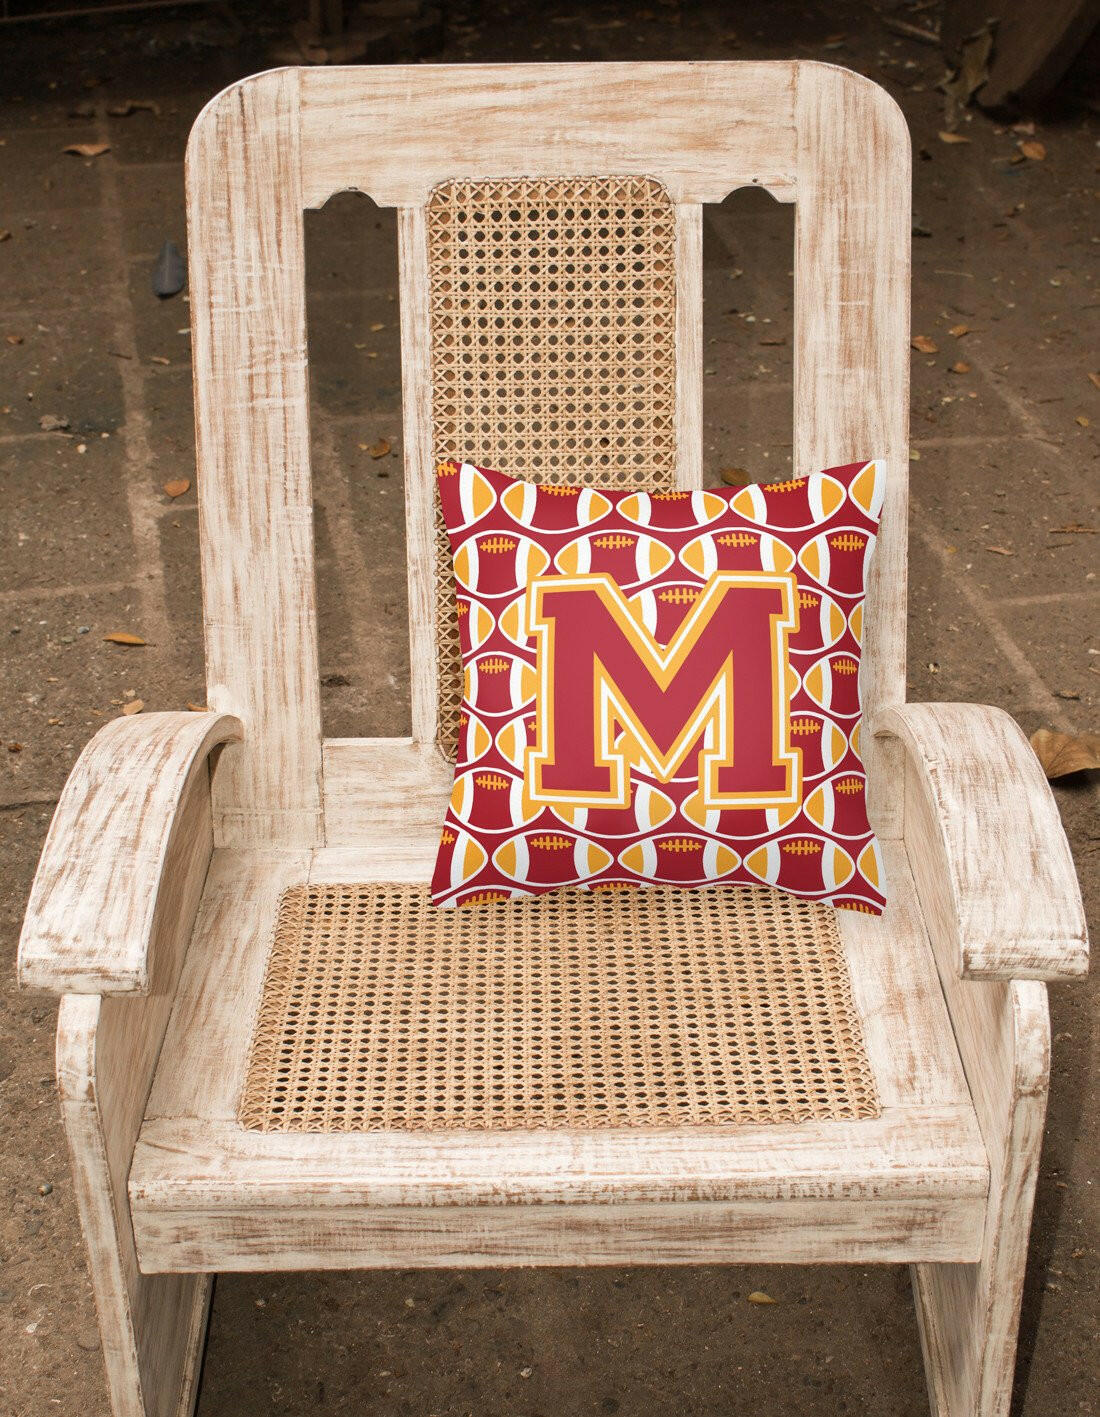 Letter M Football Cardinal and Gold Fabric Decorative Pillow CJ1070-MPW1414 by Caroline's Treasures